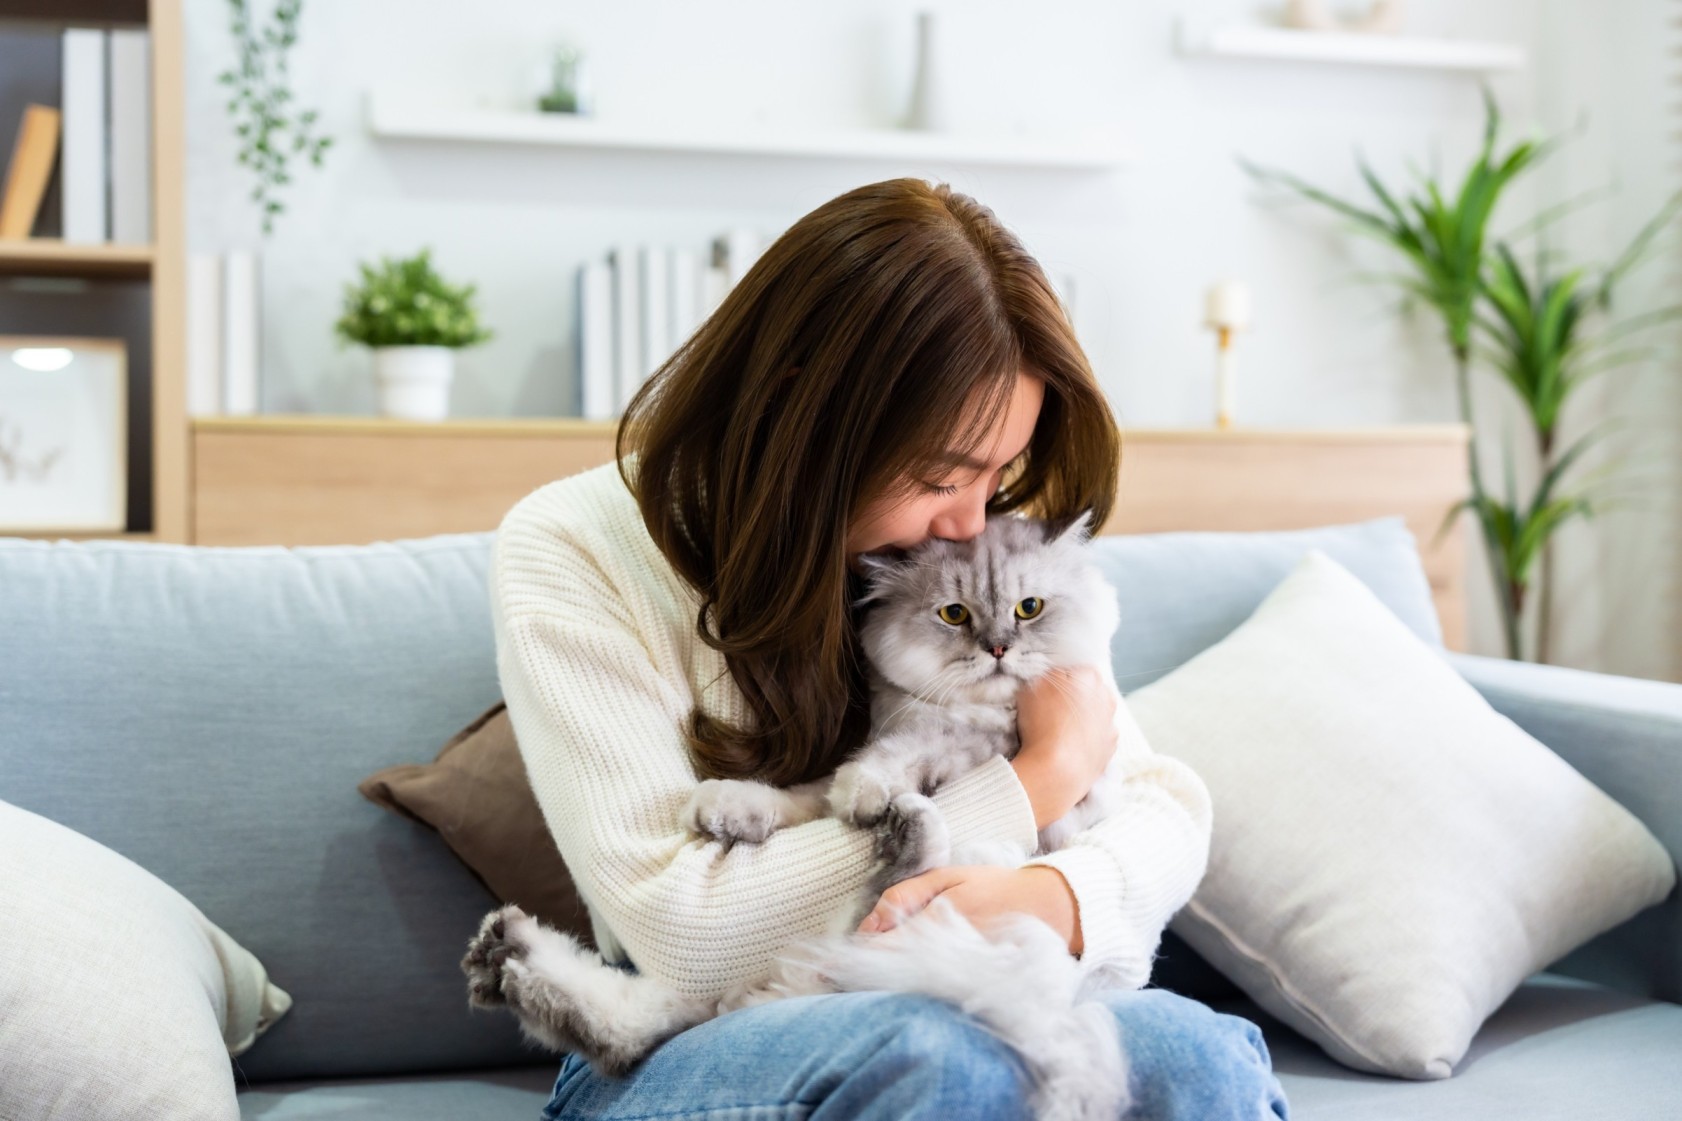 A woman hugging a cat on a couch